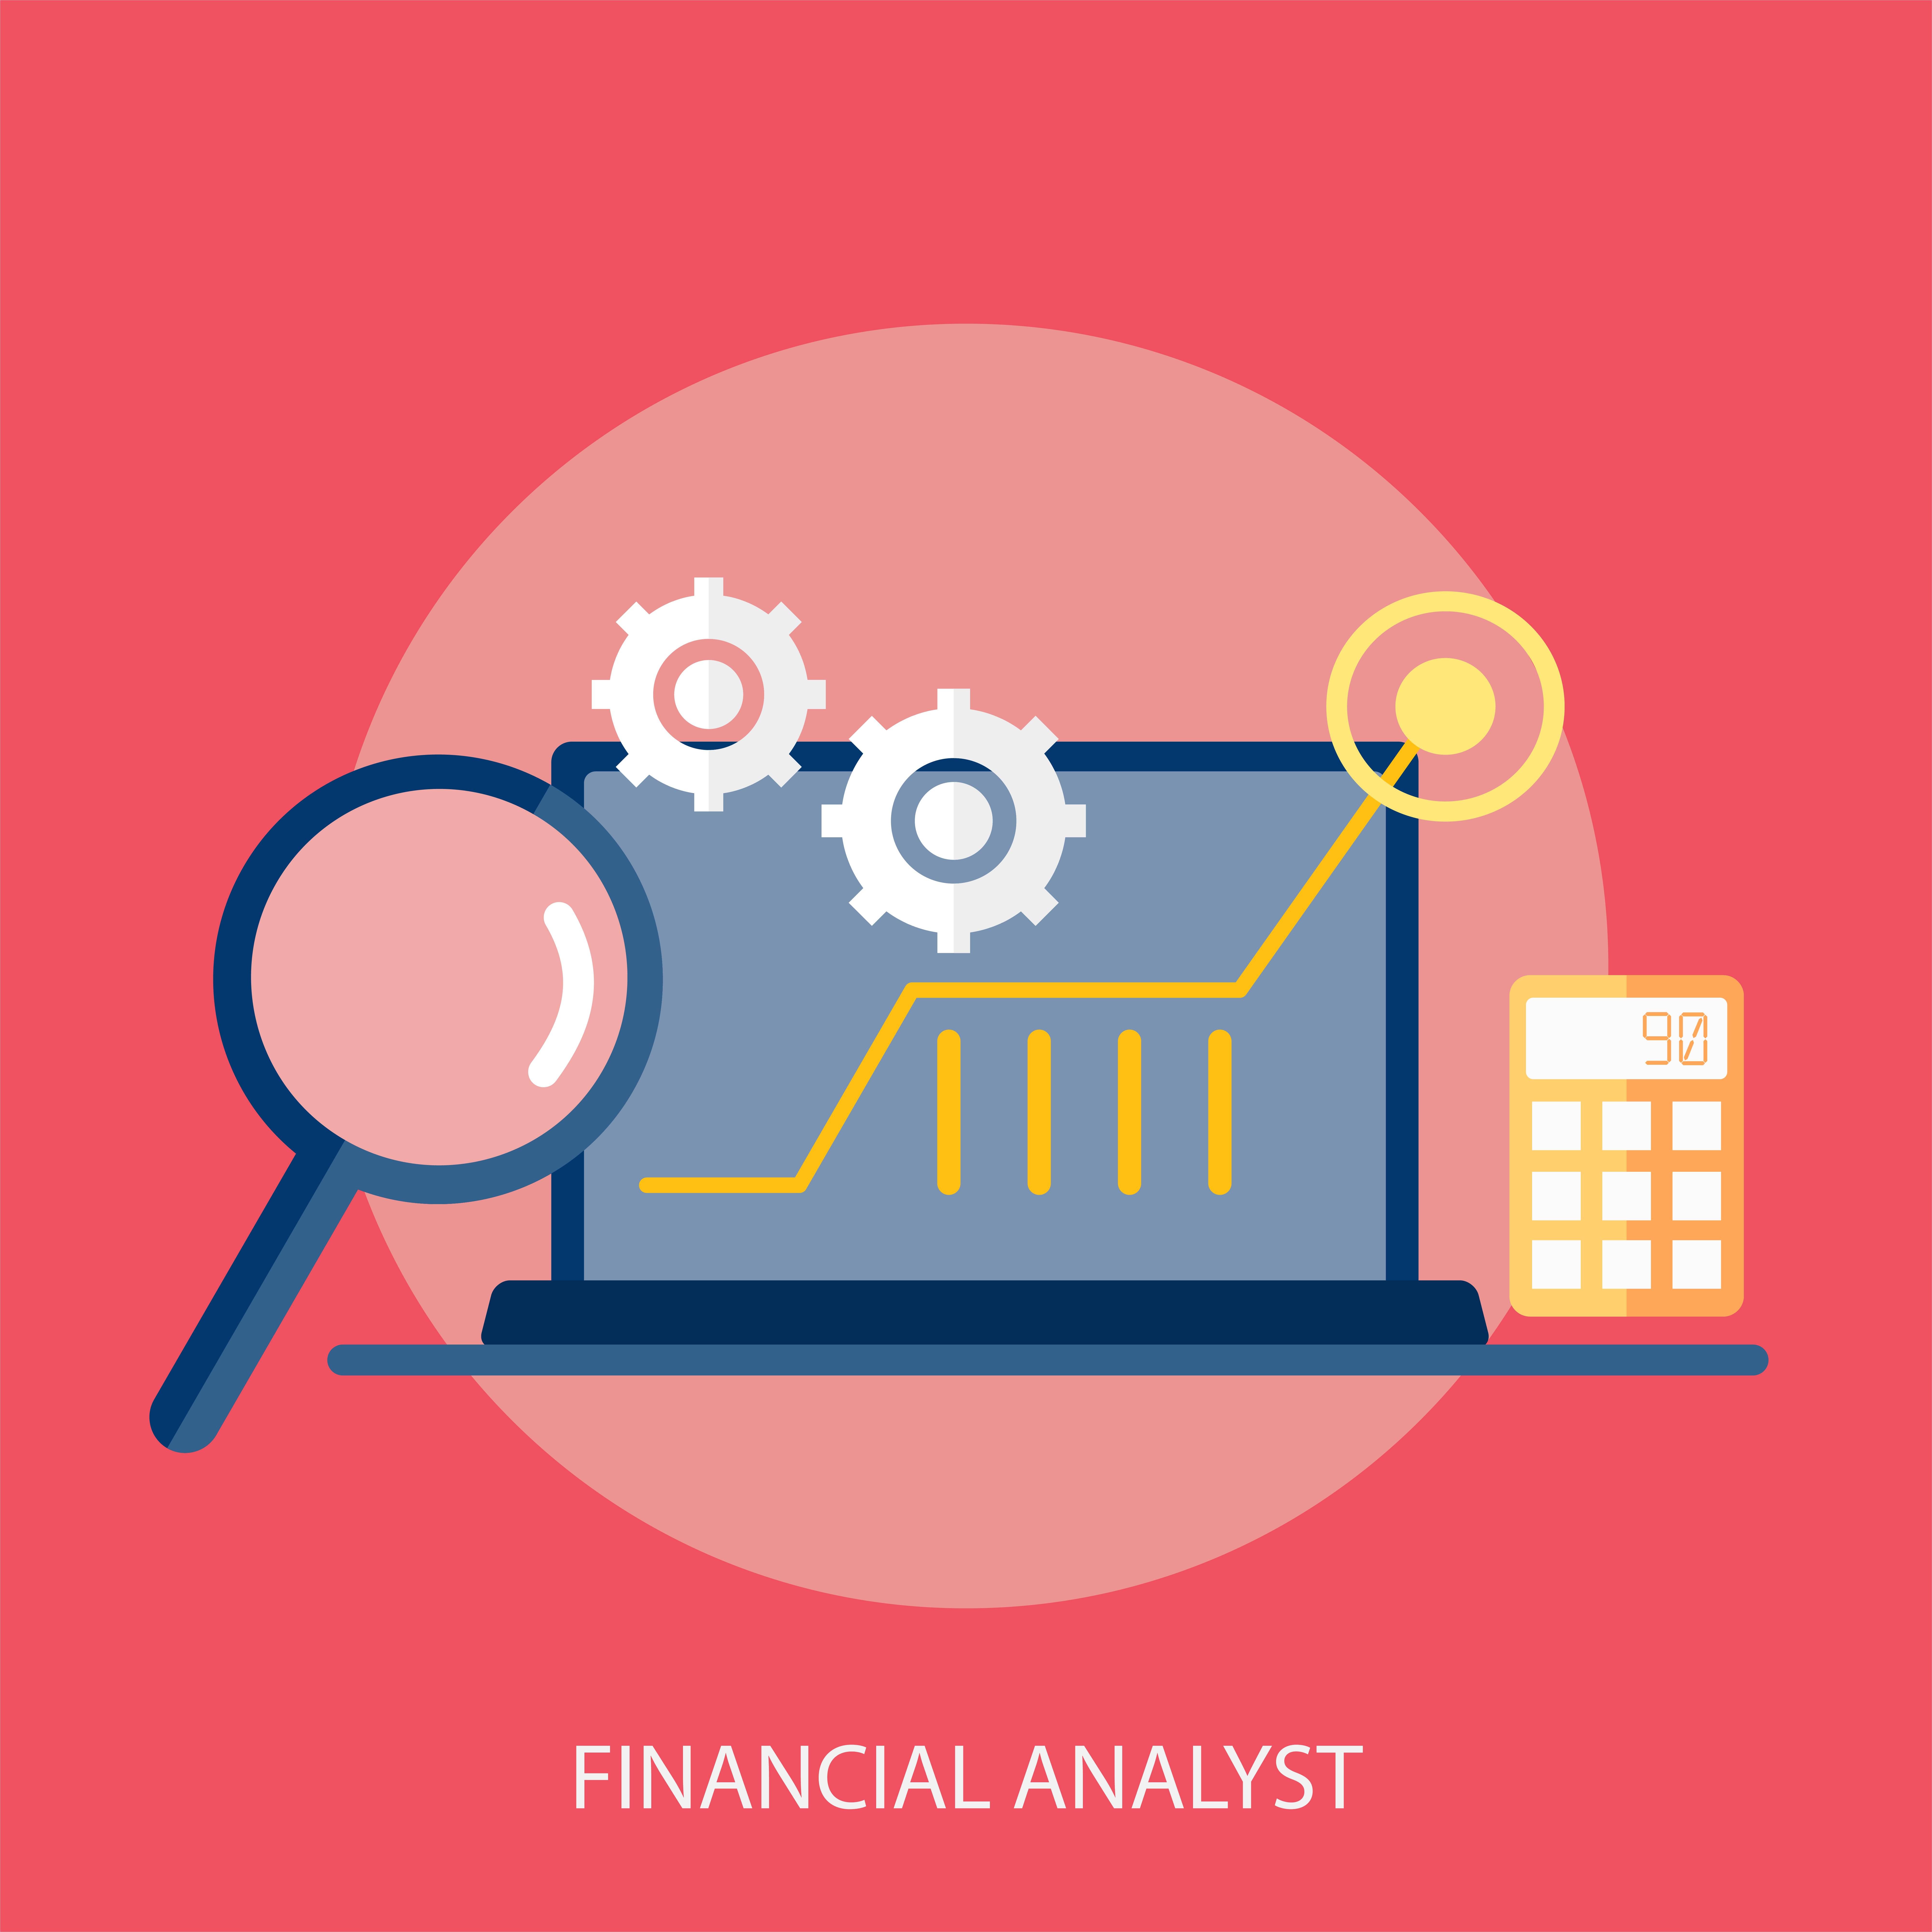 accounting and finance degree careers